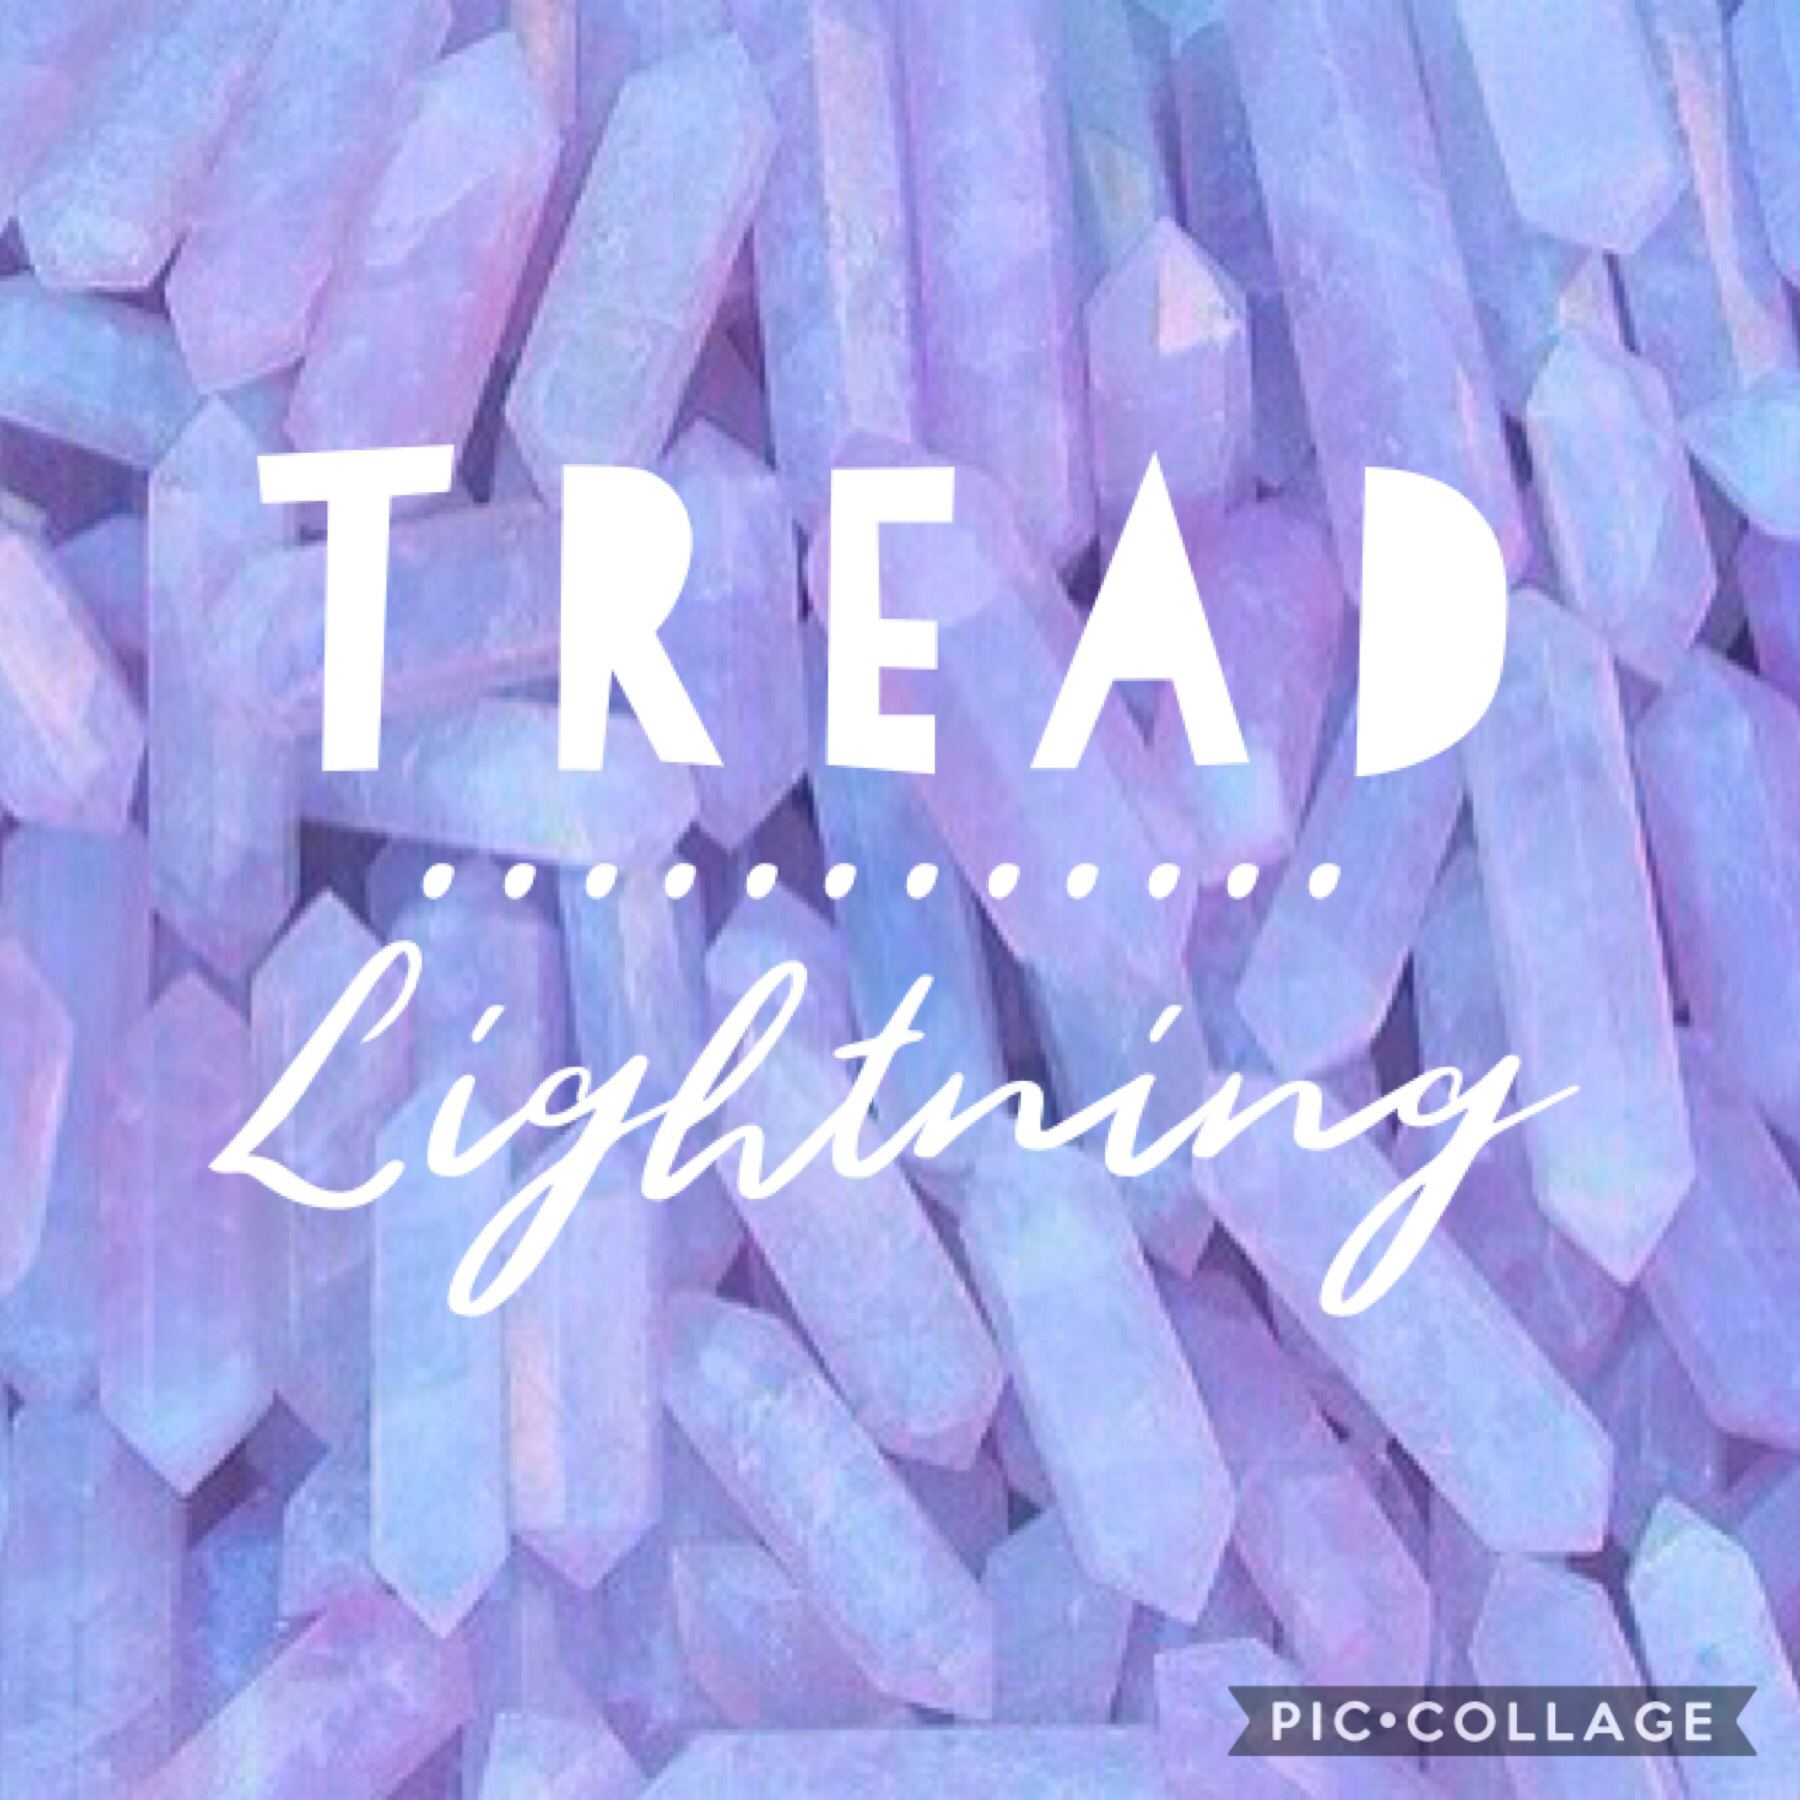 TREAD LIGHTING. CLICK!
This means to keep persevering and don’t give up. 